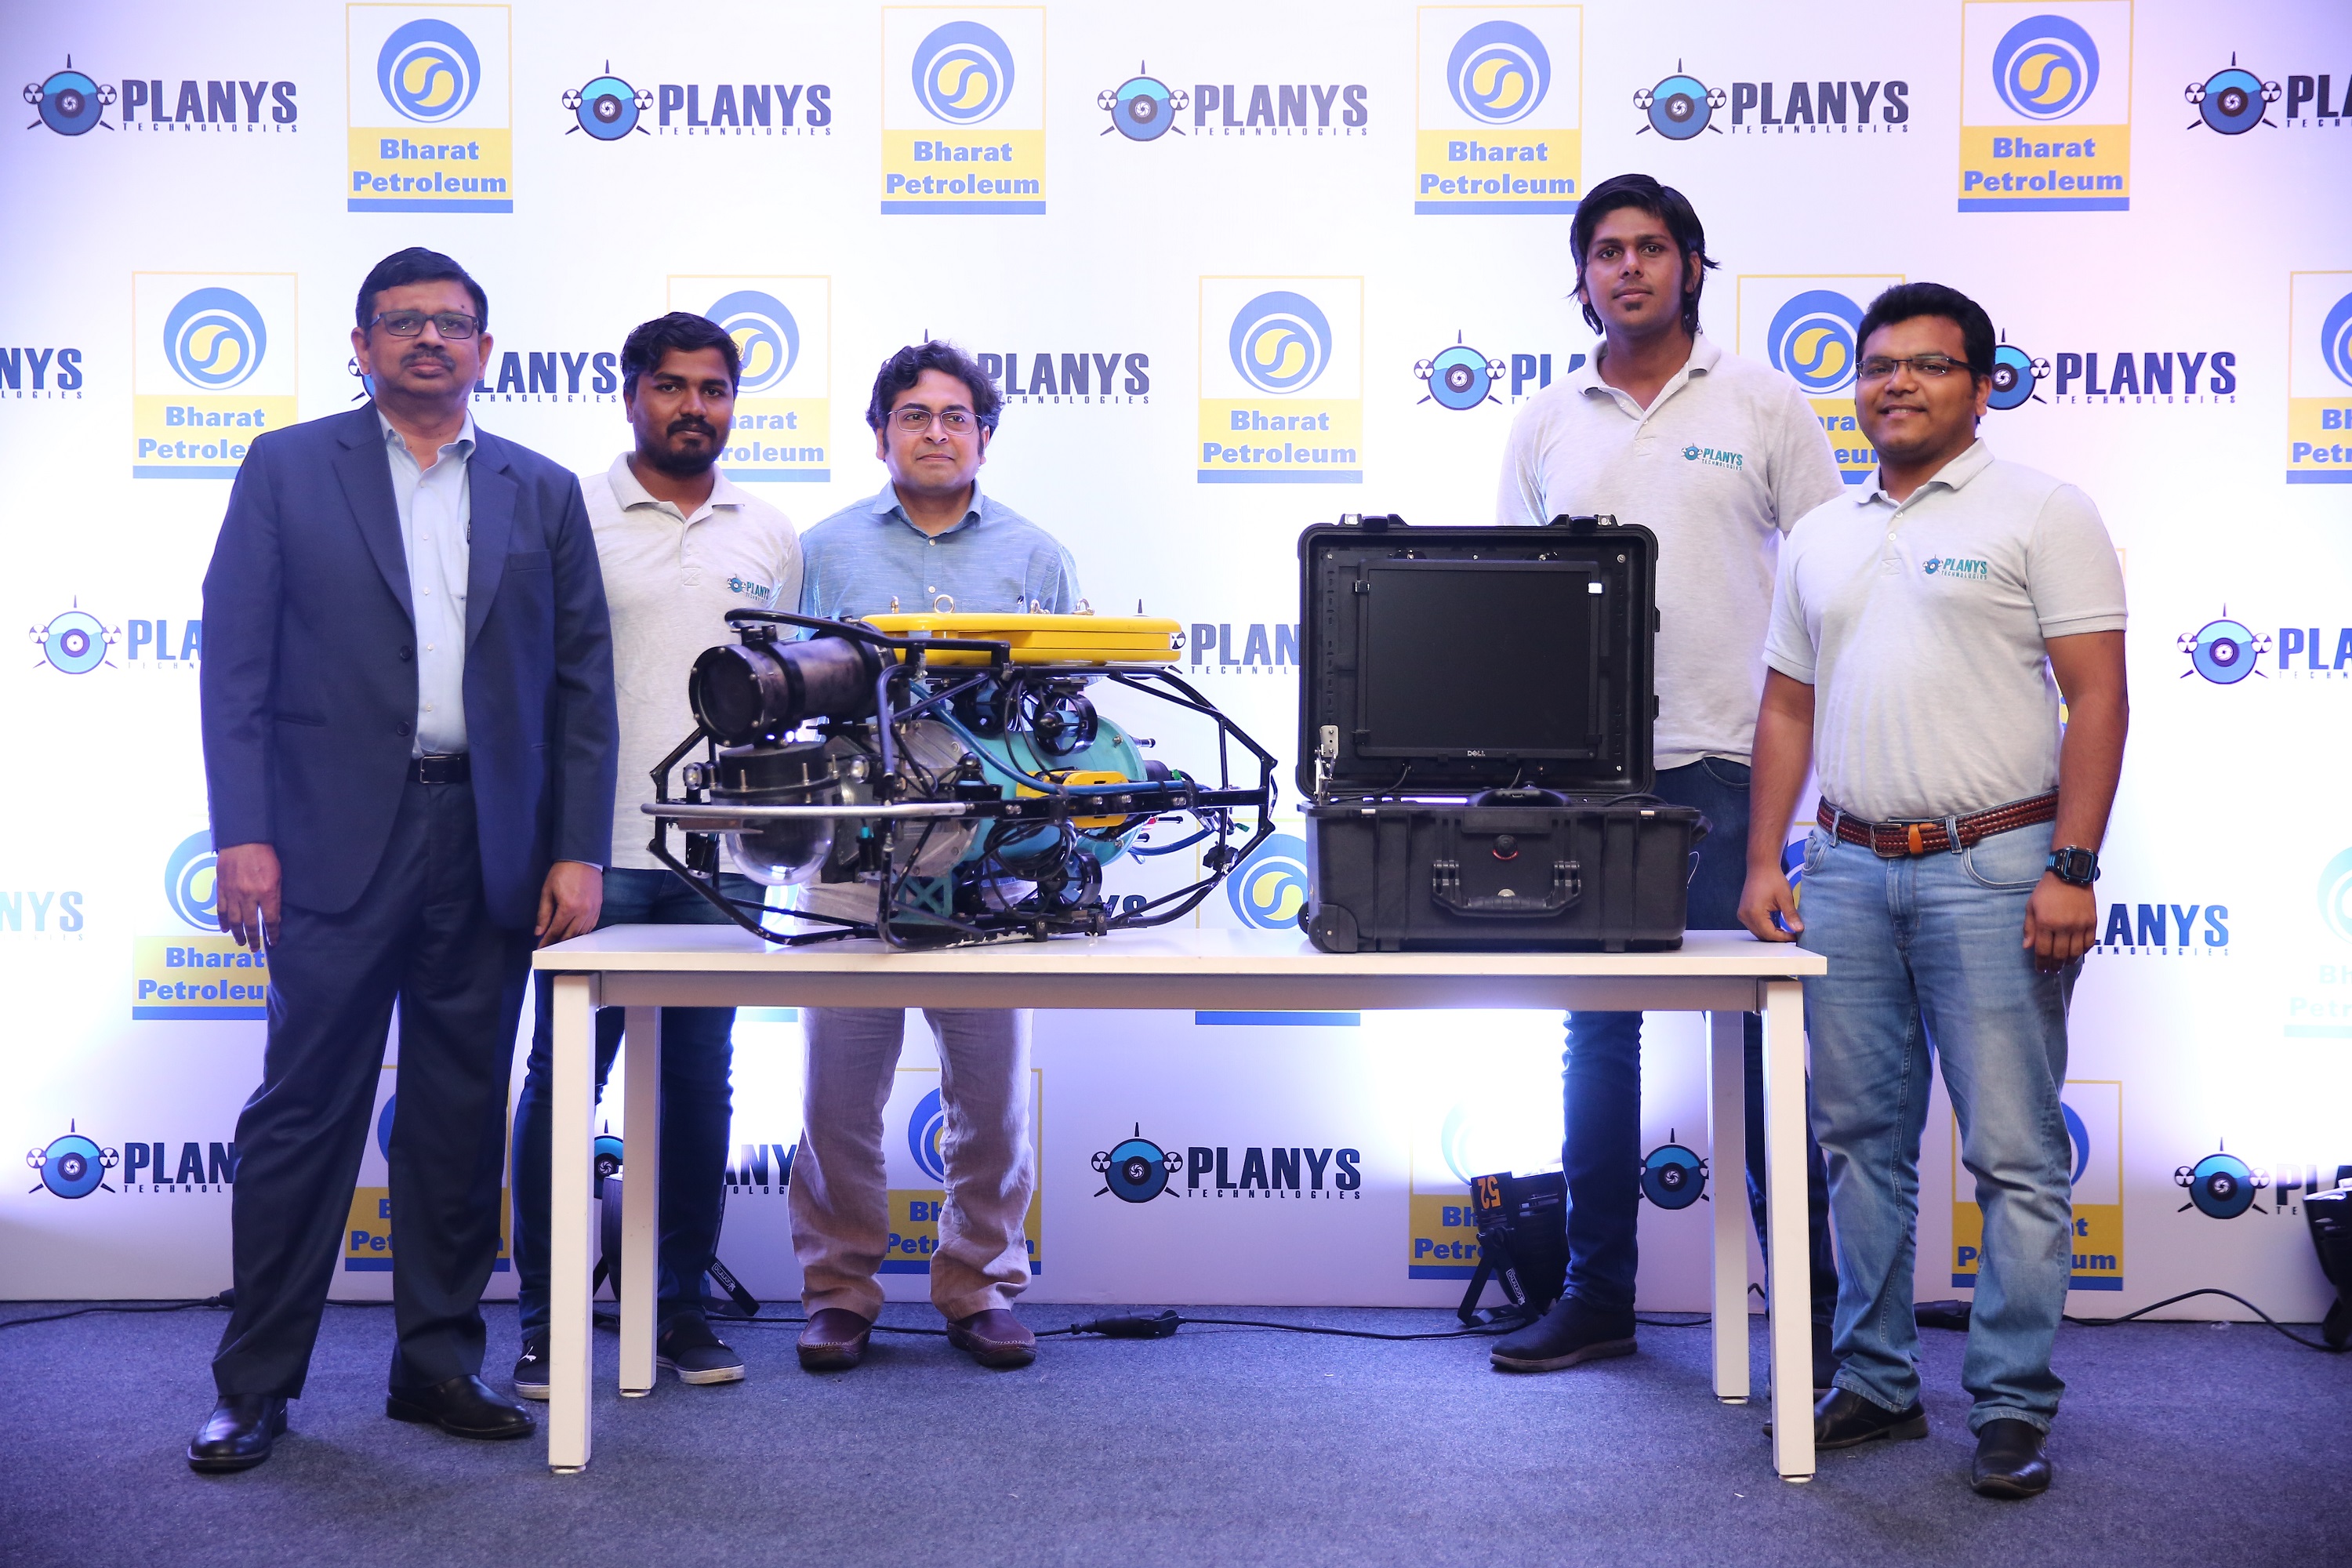 Planys launches next generation ROV Mikros